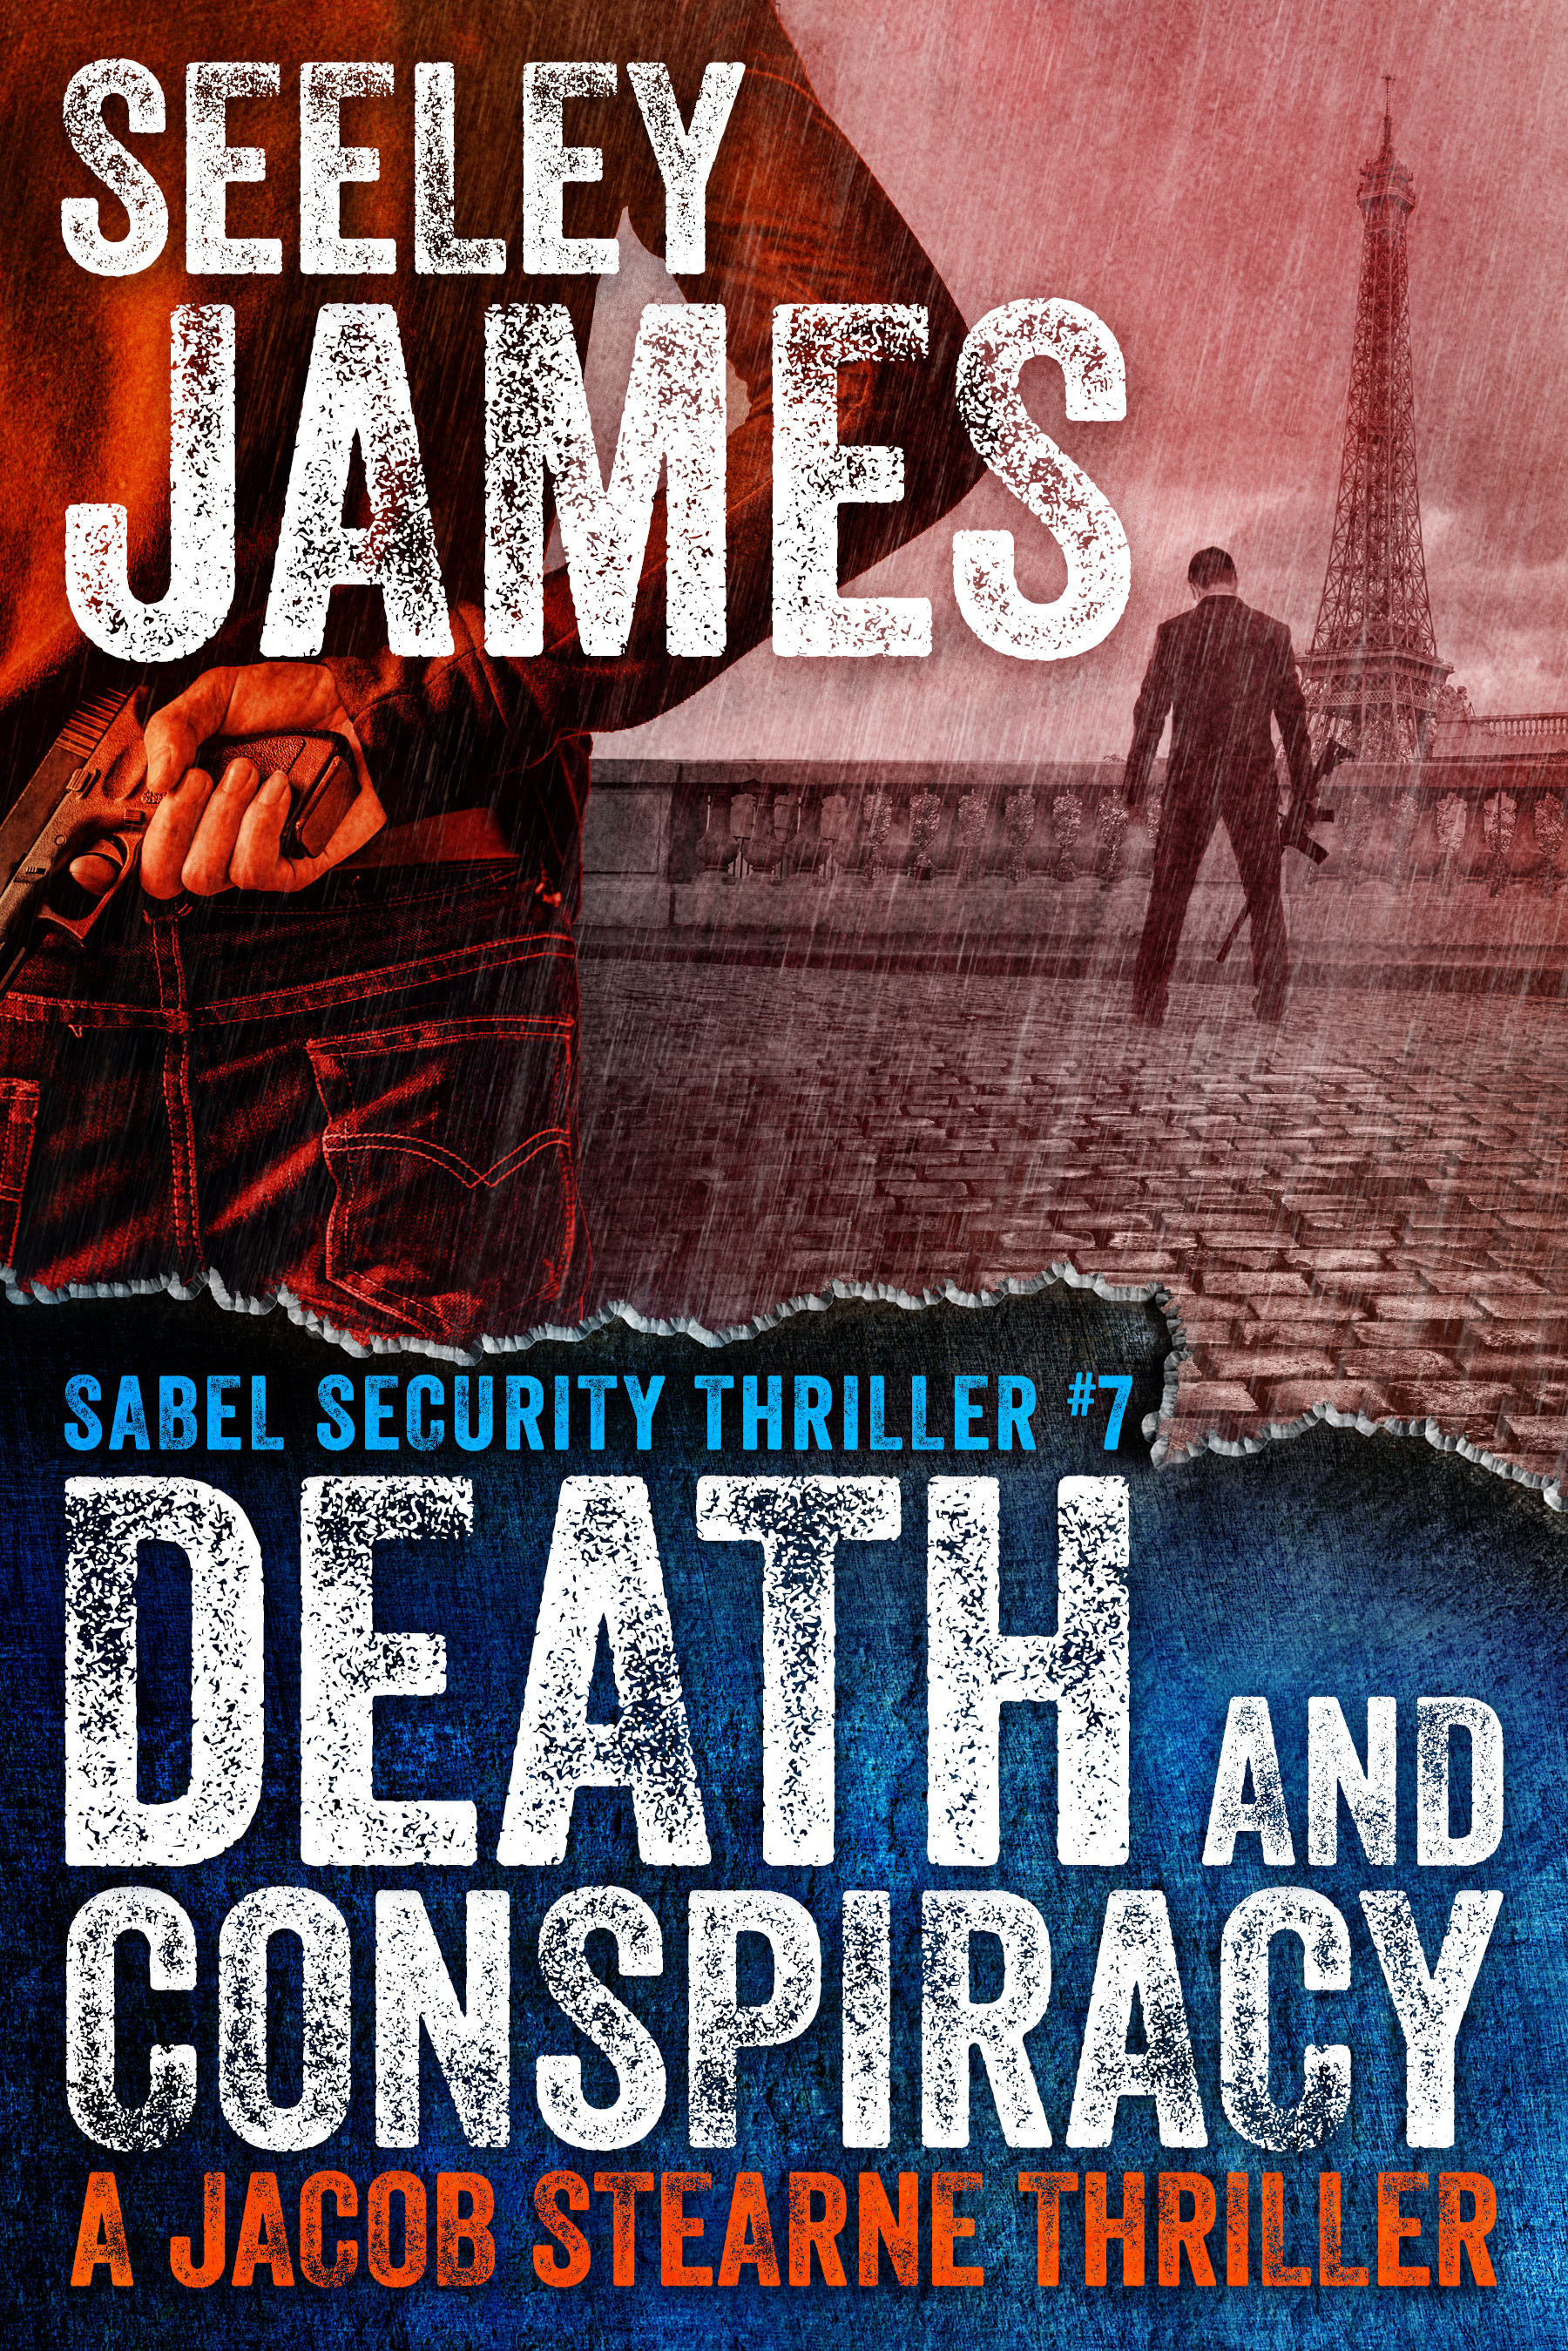 Death and Conspiracy by Seeley James